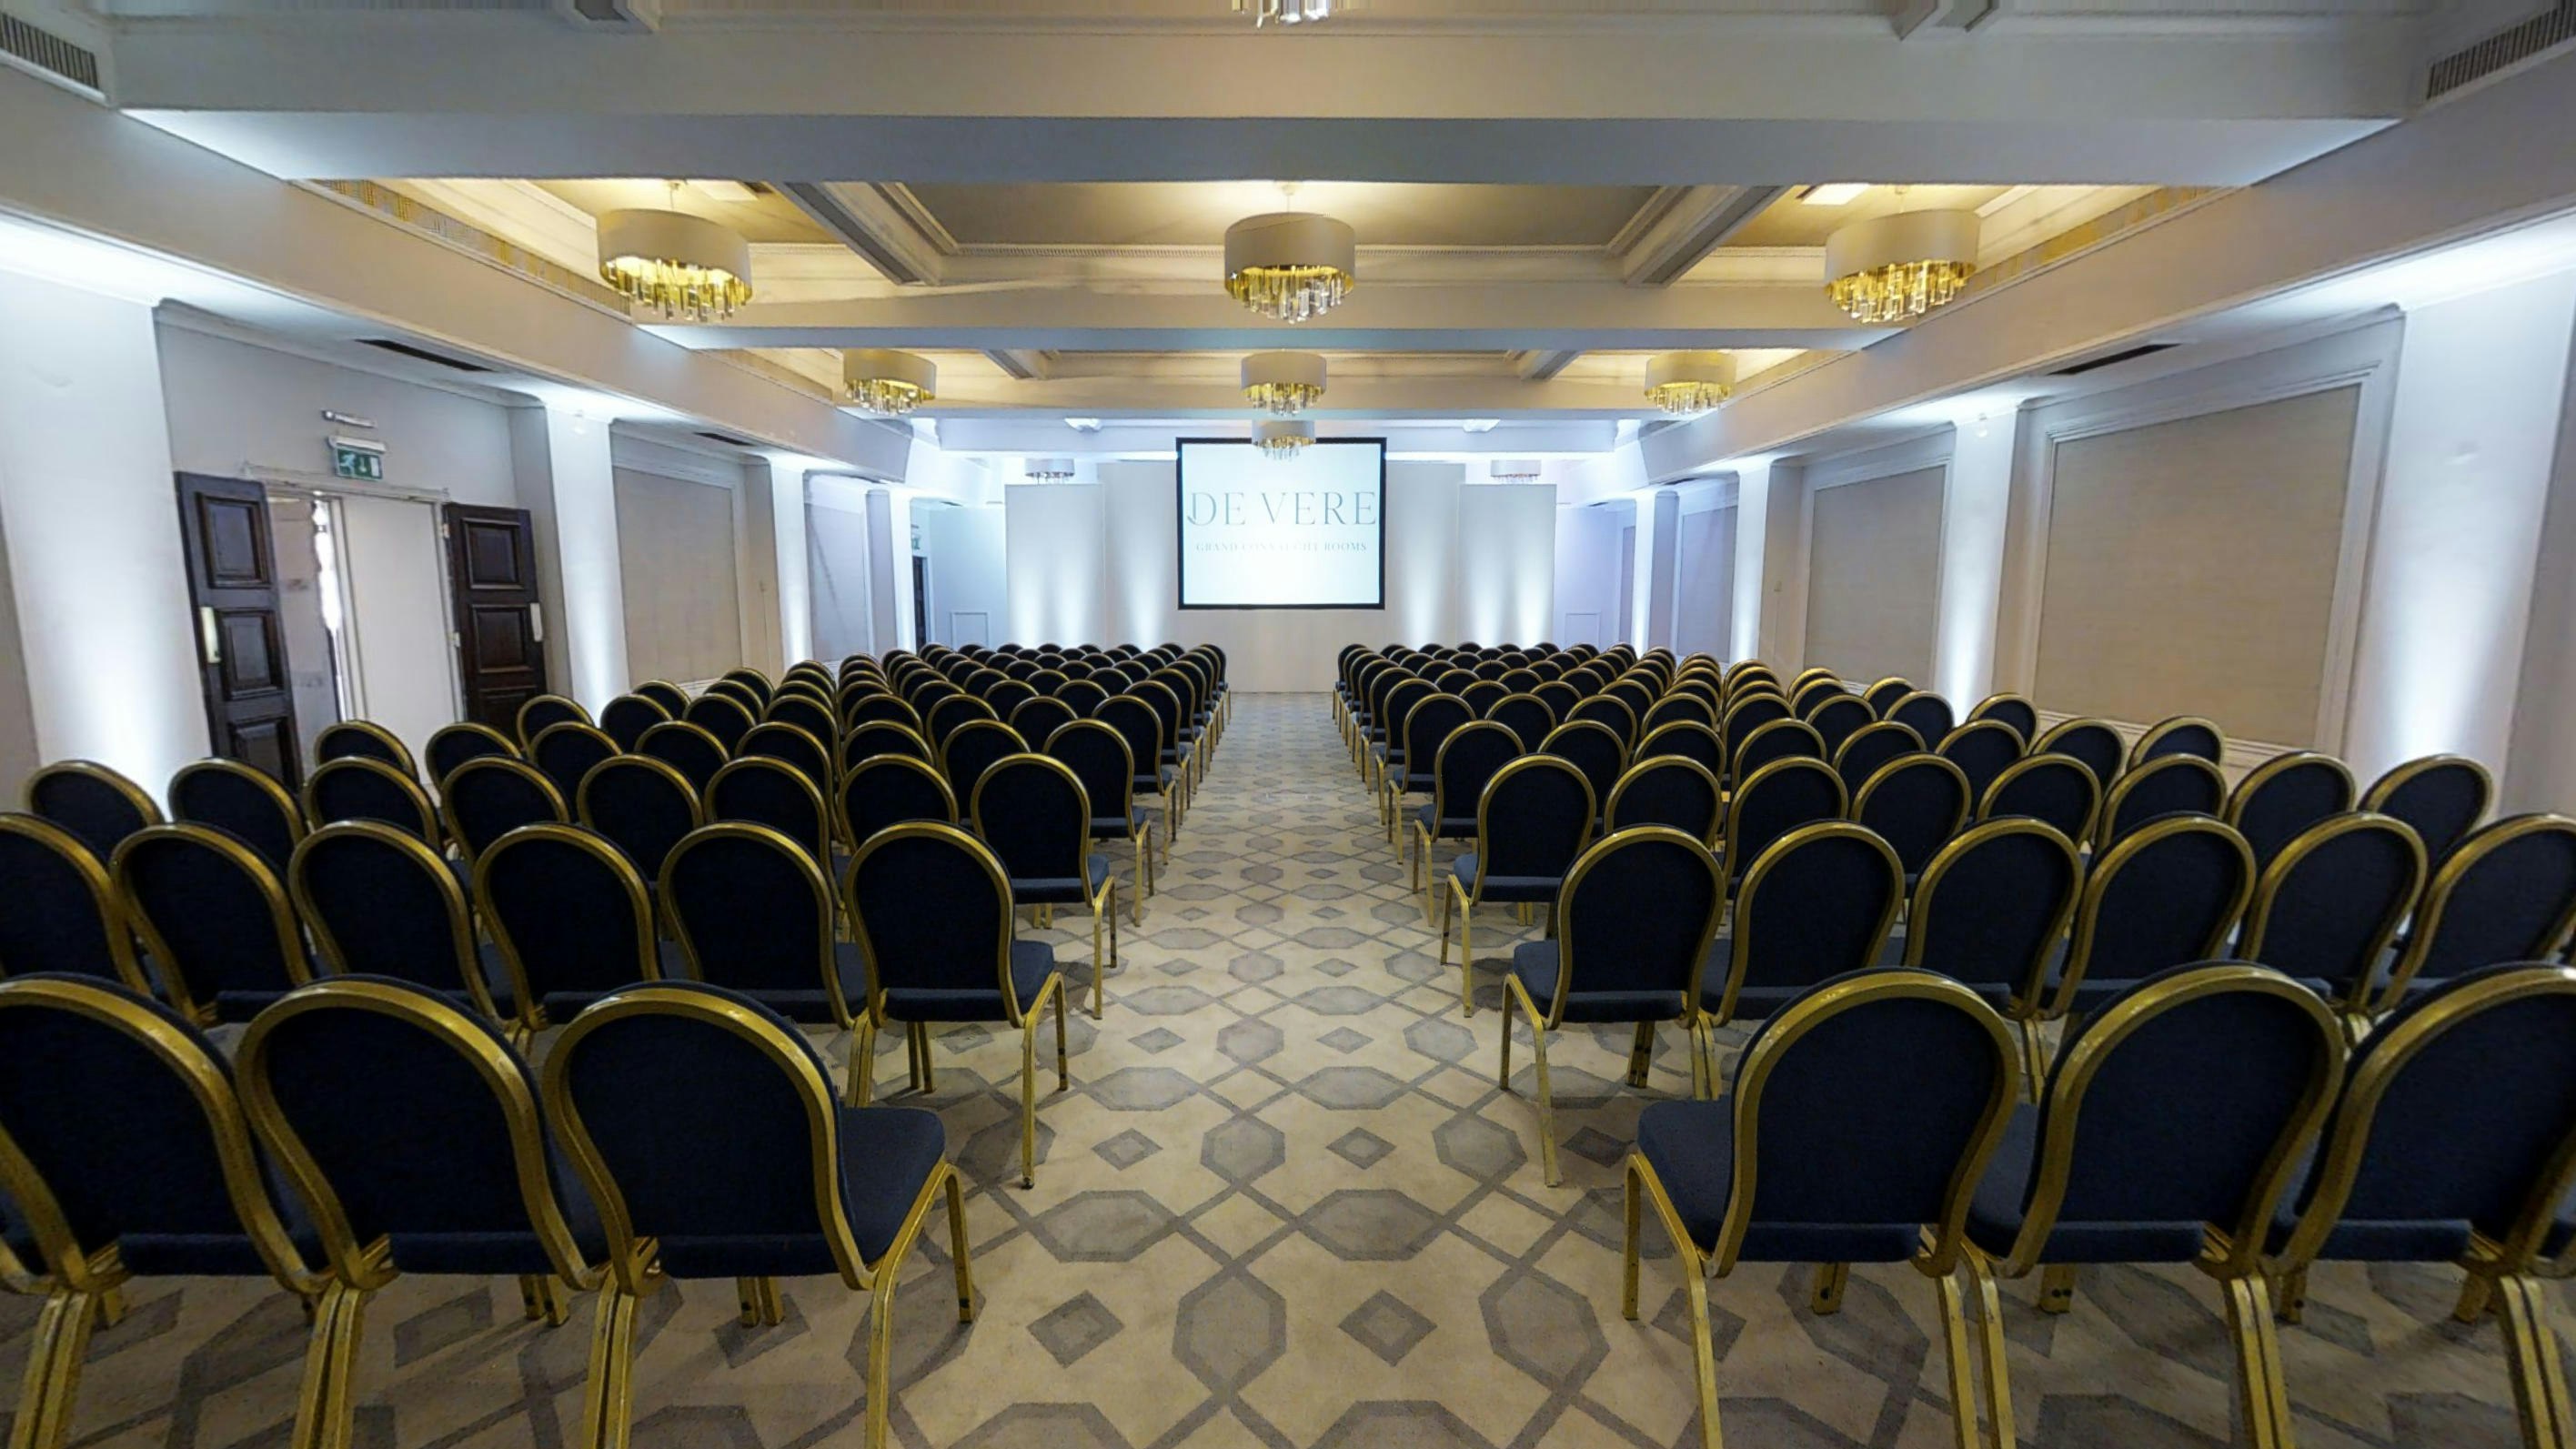 De Vere Grand Connaught Rooms  - Crown & Cornwall Suites image 5